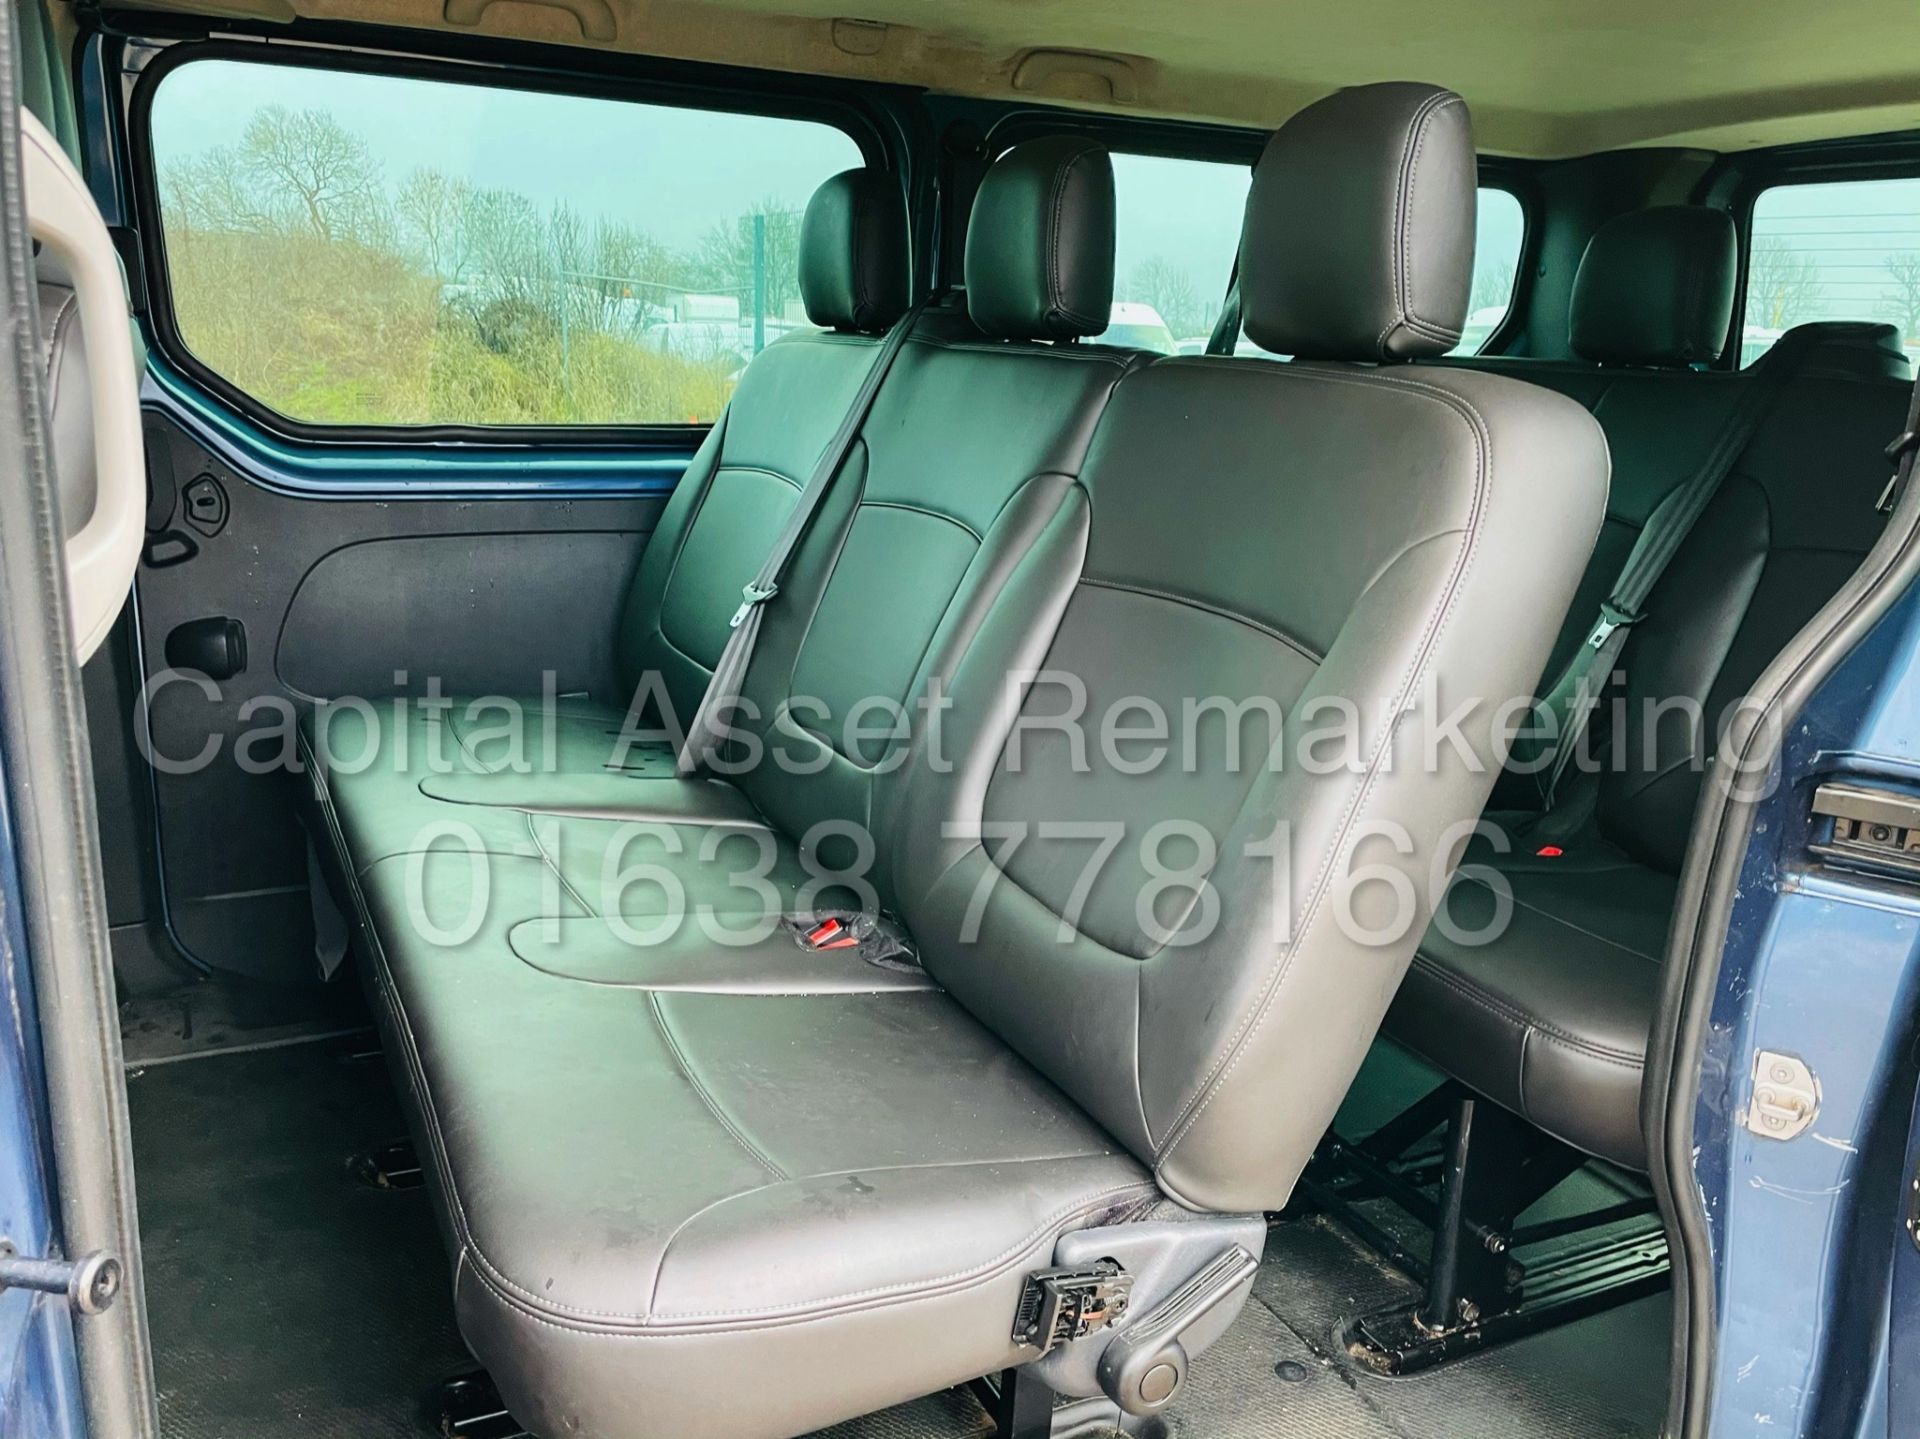 RENAULT TRAFIC *LWB - 9 SEATER MPV / BUS* (2017 - EURO 6) '1.6 DCI - 6 SPEED' *AIR CON* (NO VAT) - Image 24 of 47